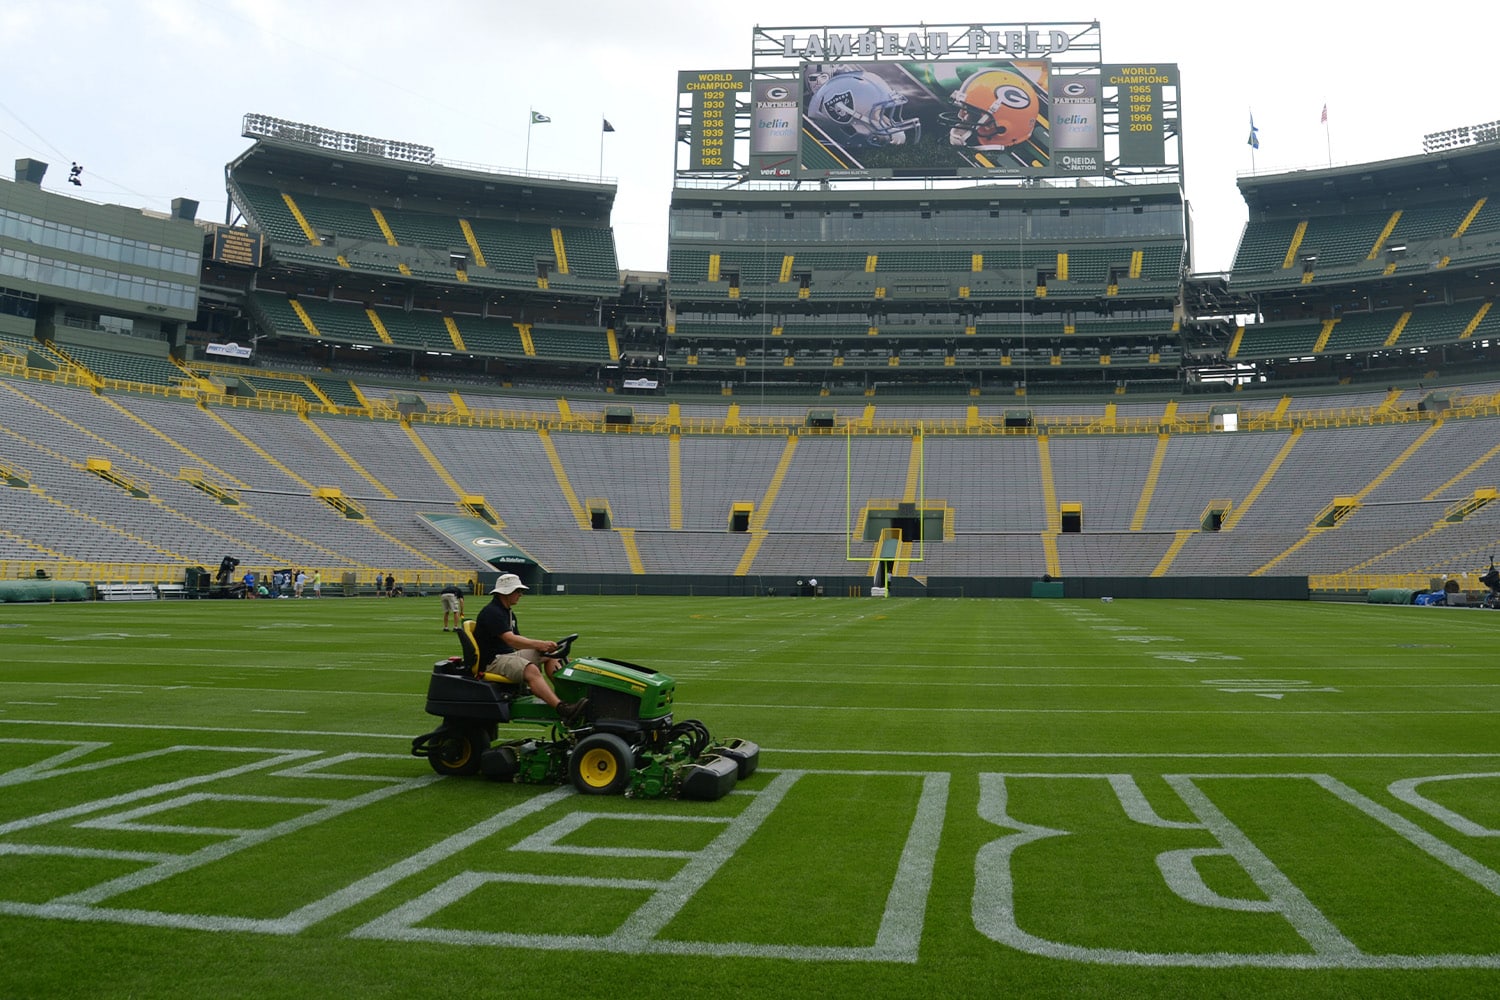 Getting Rid of Artificial Surfaces Could Cost NFL $12M